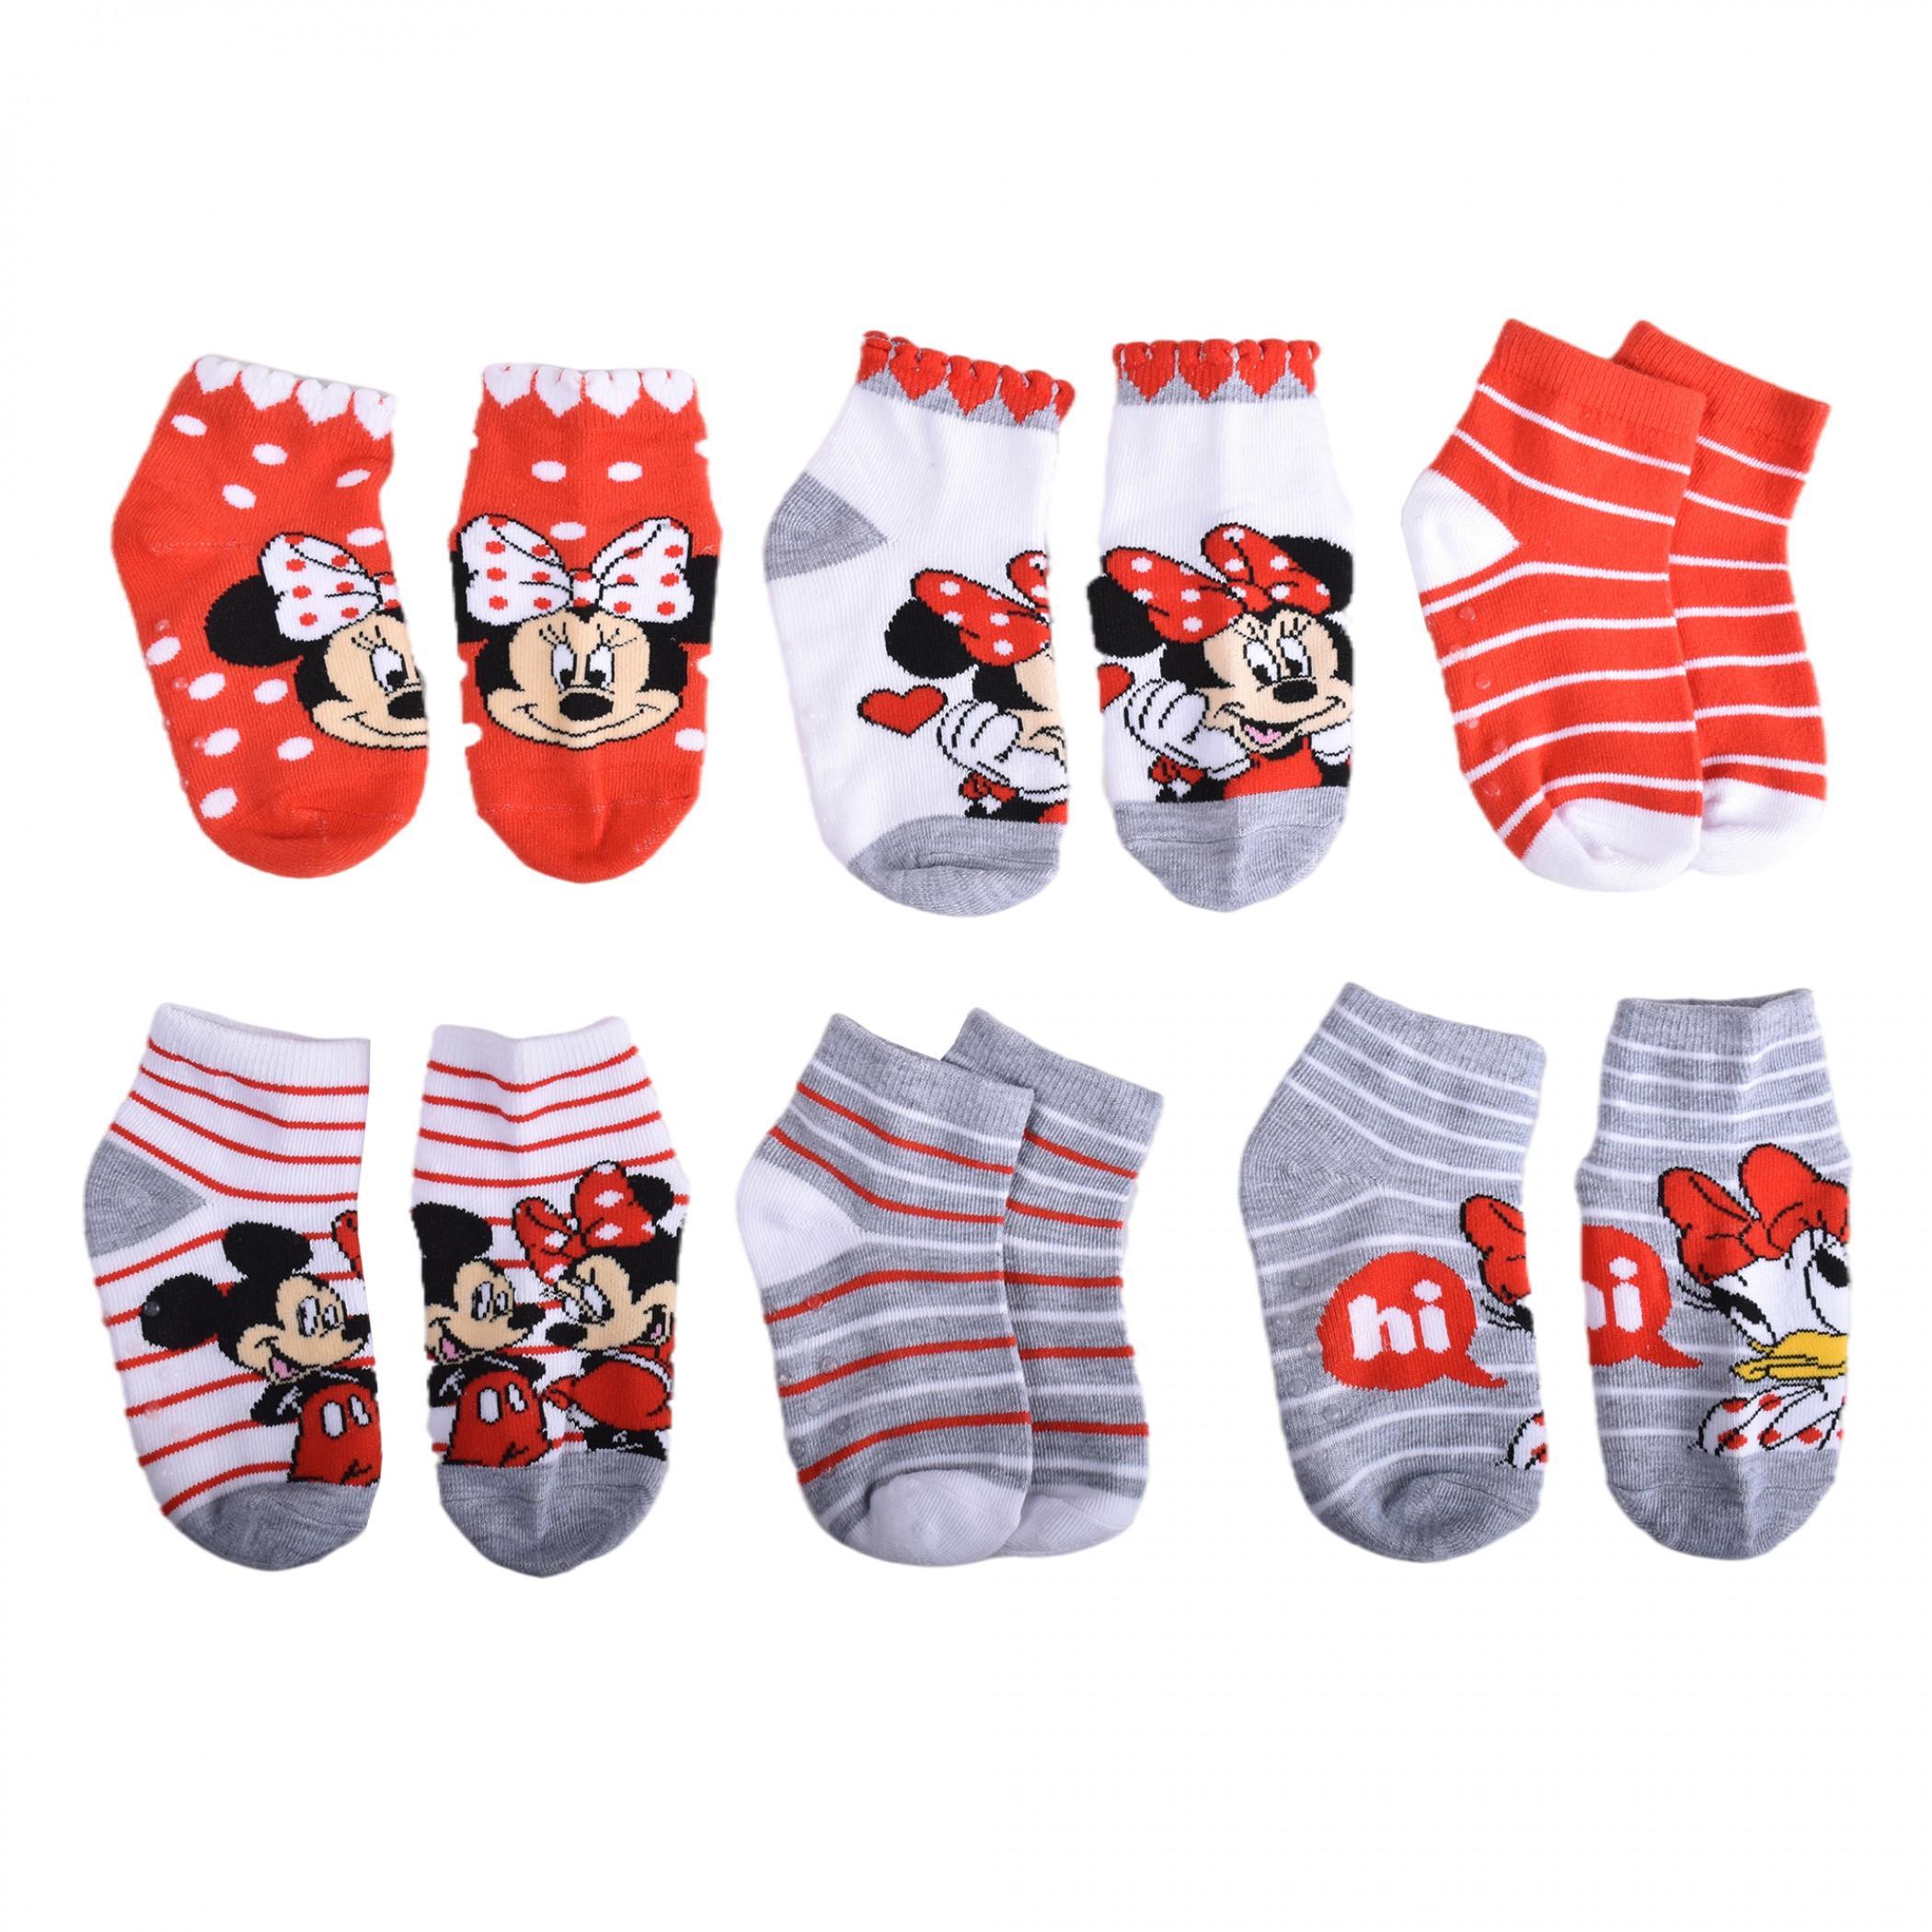 Disney Minnie Mouse and Daisy Duck Baby Girl Crew Socks 6-Pack Size 18-24M